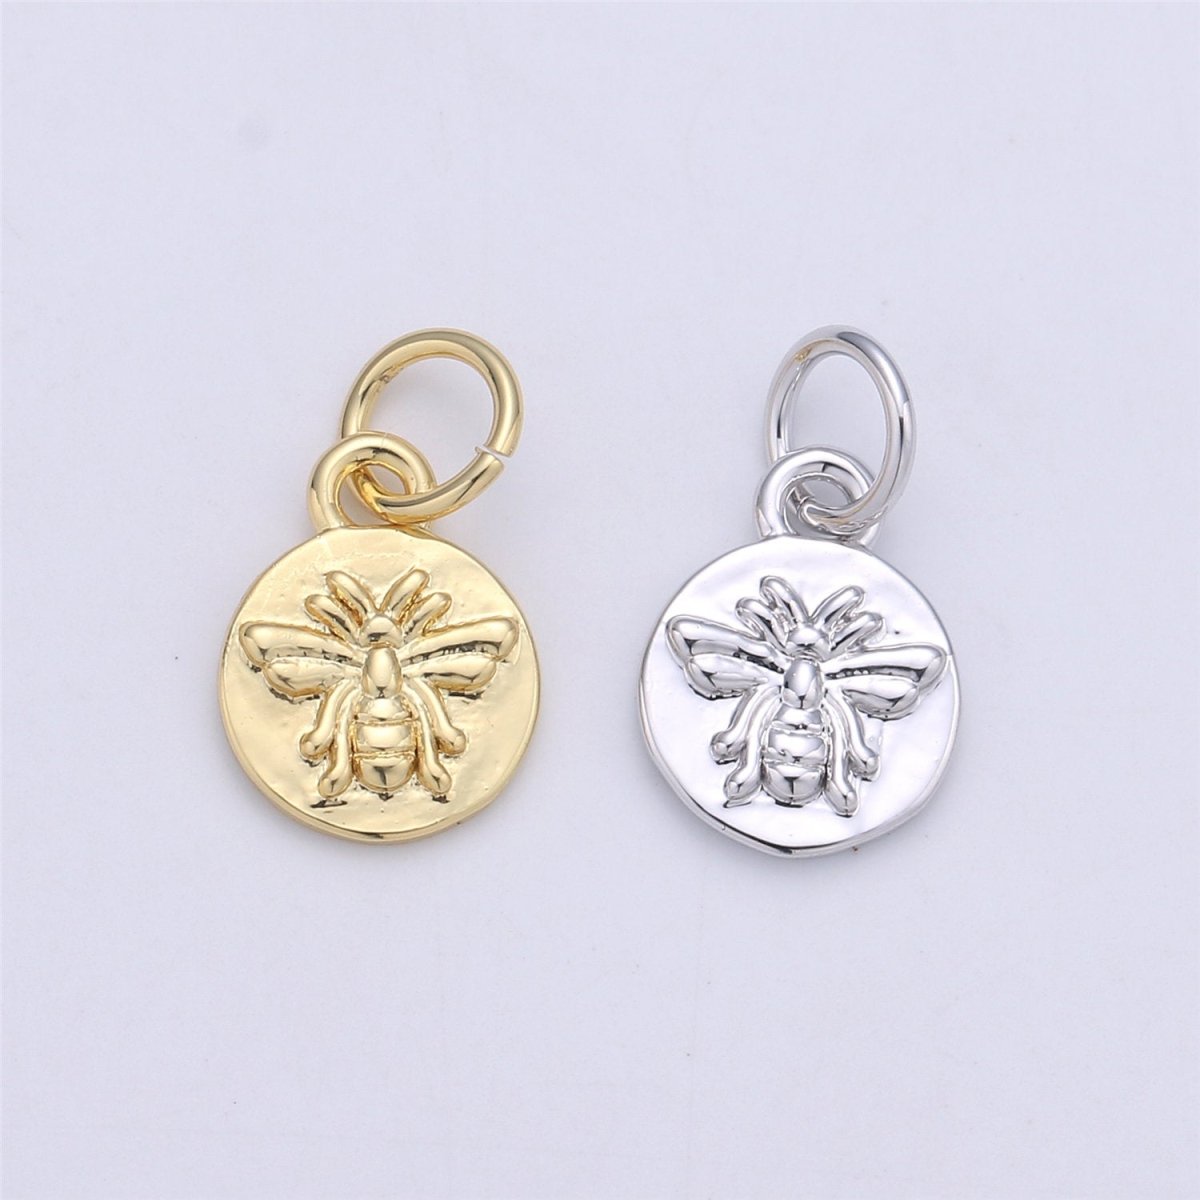 OS Dainty 18K Gold Filled Bee Charm Bumblebee, Honeybee, Queen Bee, Coin Disc Charm, Tiny Charm, Gold Charm Bracelet Earring Necklace Charm, C-349 - DLUXCA